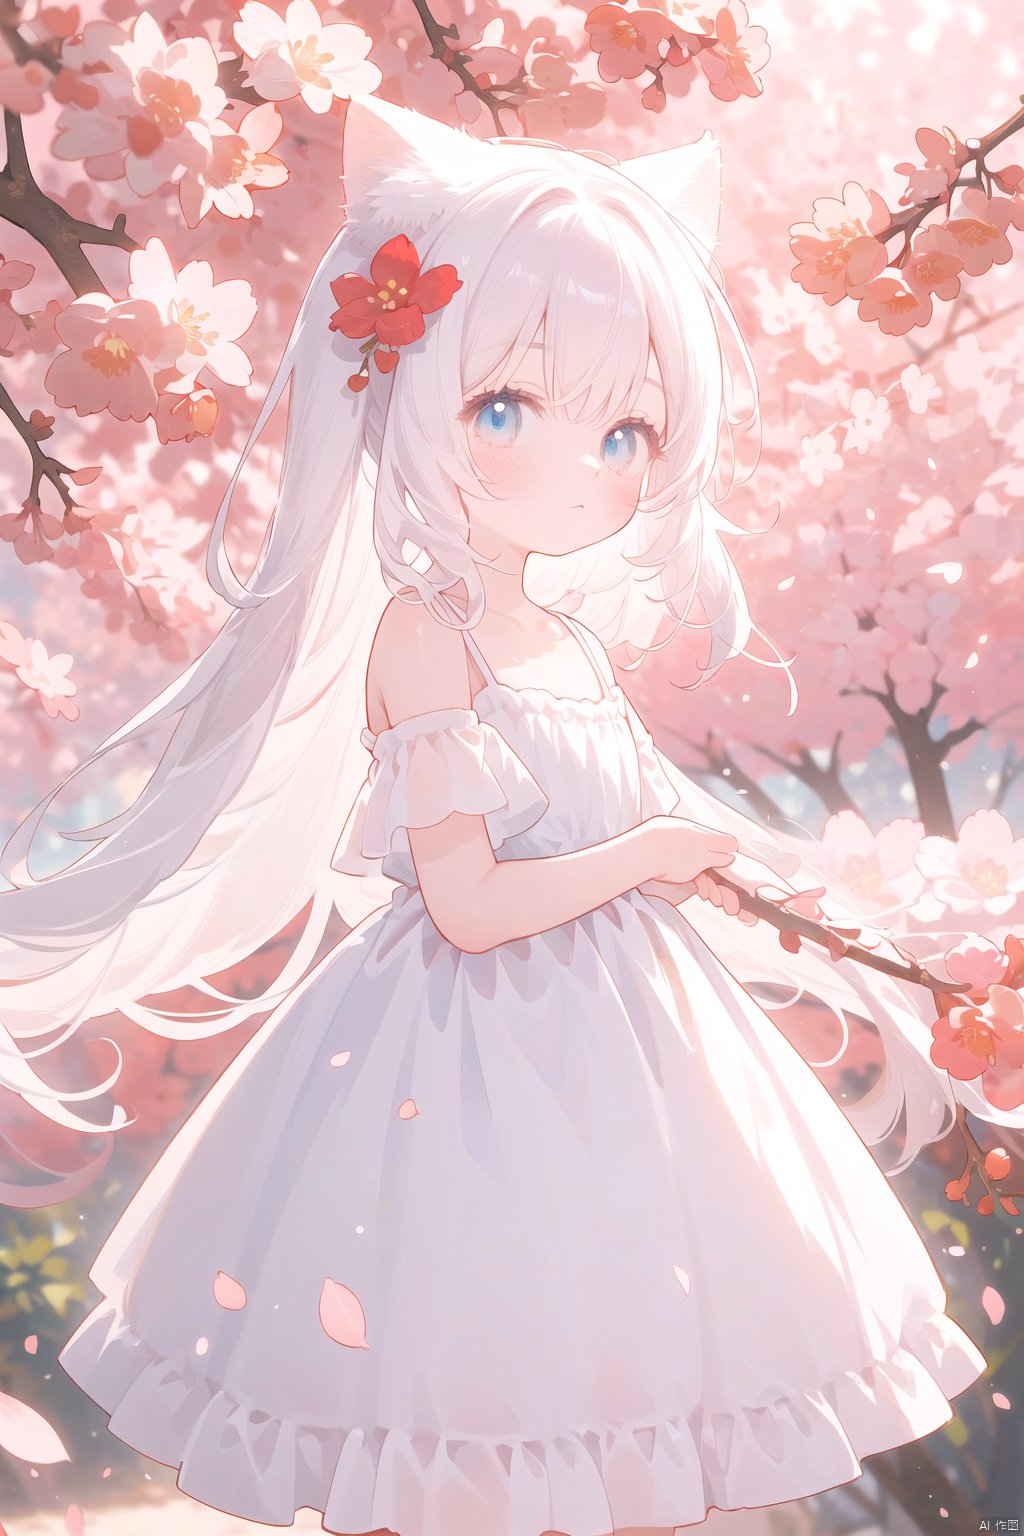  The image features a beautiful anime girl dressed in a flowing white and red dress, standing amidst a flurry of red cherry blossoms. The contrast between her white dress and the red flowers creates a striking visual effect. The lighting in the image is well-balanced, casting a warm glow on the girl and the surrounding flowers. The colors are vibrant and vivid, with the red cherry blossoms standing out against the white sky. The overall style of the image is dreamy and romantic, perfect for a piece of anime artwork. The quality of the image is excellent, with clear details and sharp focus. The girl's dress and the flowers are well-defined, and the background is evenly lit, without any harsh shadows or glare. From a technical standpoint, the image is well-composed, with the girl standing in the center of the frame, surrounded by the blossoms. The use of negative space in the background helps to draw the viewer's attention to the girl and the flowers. The cherry blossoms, often associated with transience and beauty, further reinforce this theme. The girl, lost in her thoughts, seems to be contemplating the fleeting nature of beauty and the passage of time. Overall, this is an impressive image that showcases the photographer's skill in capturing the essence of a scene, as well as their ability to create a compelling narrative through their art.catgirl,loli,catgirl,white hair,blue eyes,white dress,bare shoulders